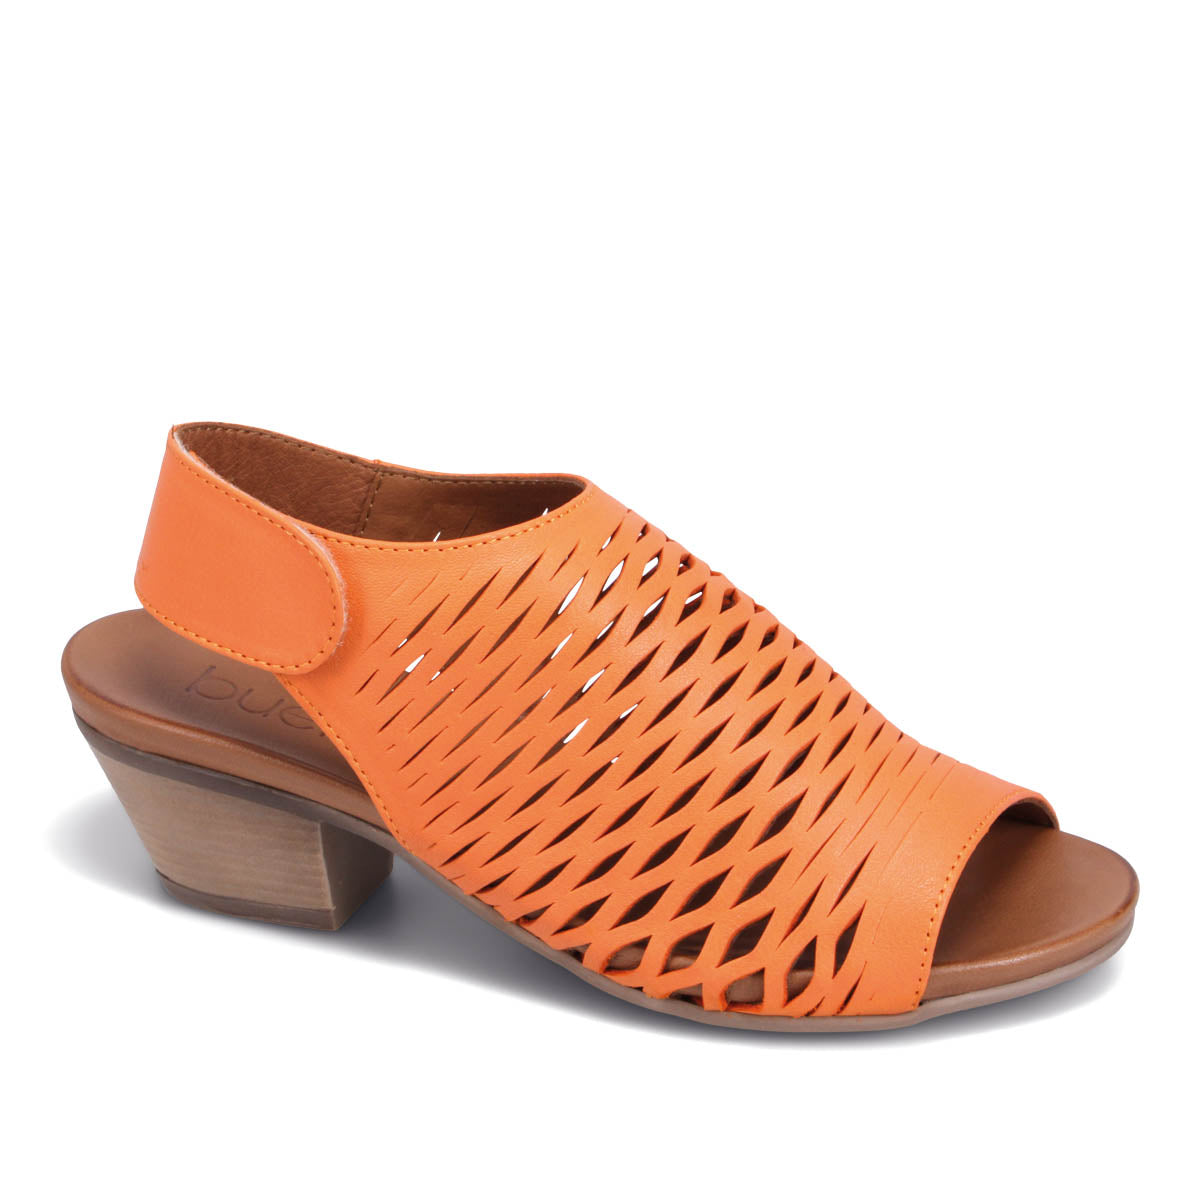 Leather Sandals | Flats, Heels, Mules & More | Bueno – Bueno Shoes